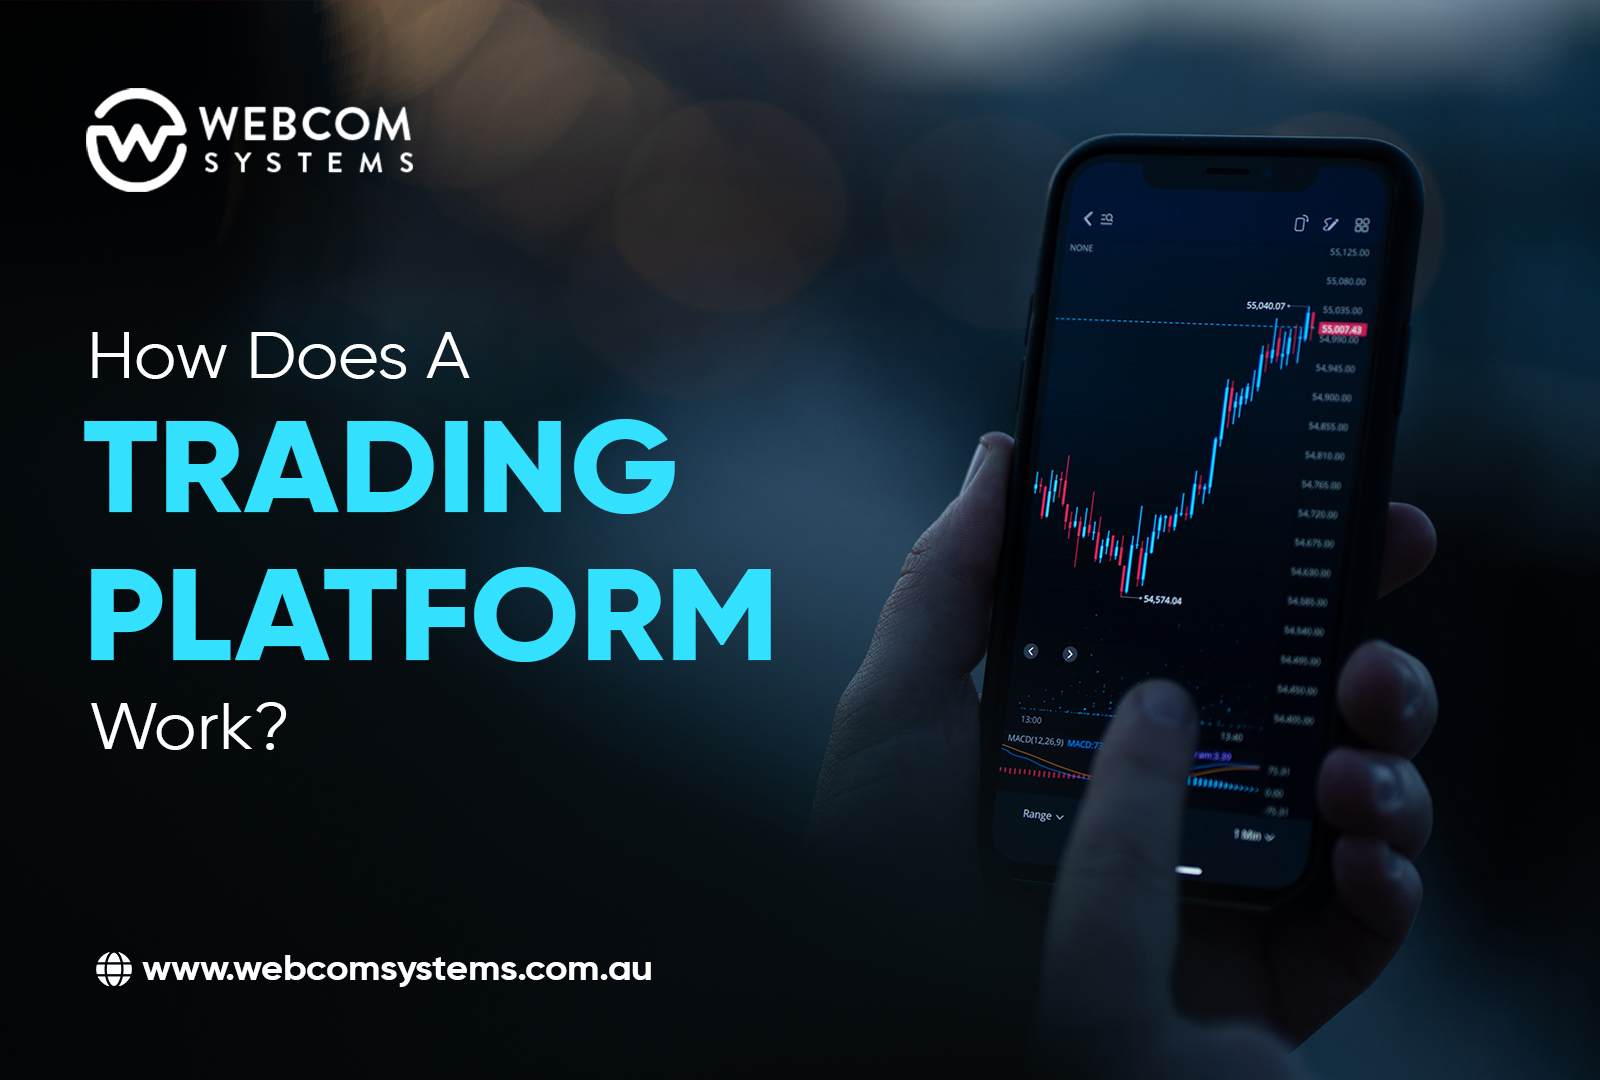 How Does A Trading Platform Work?